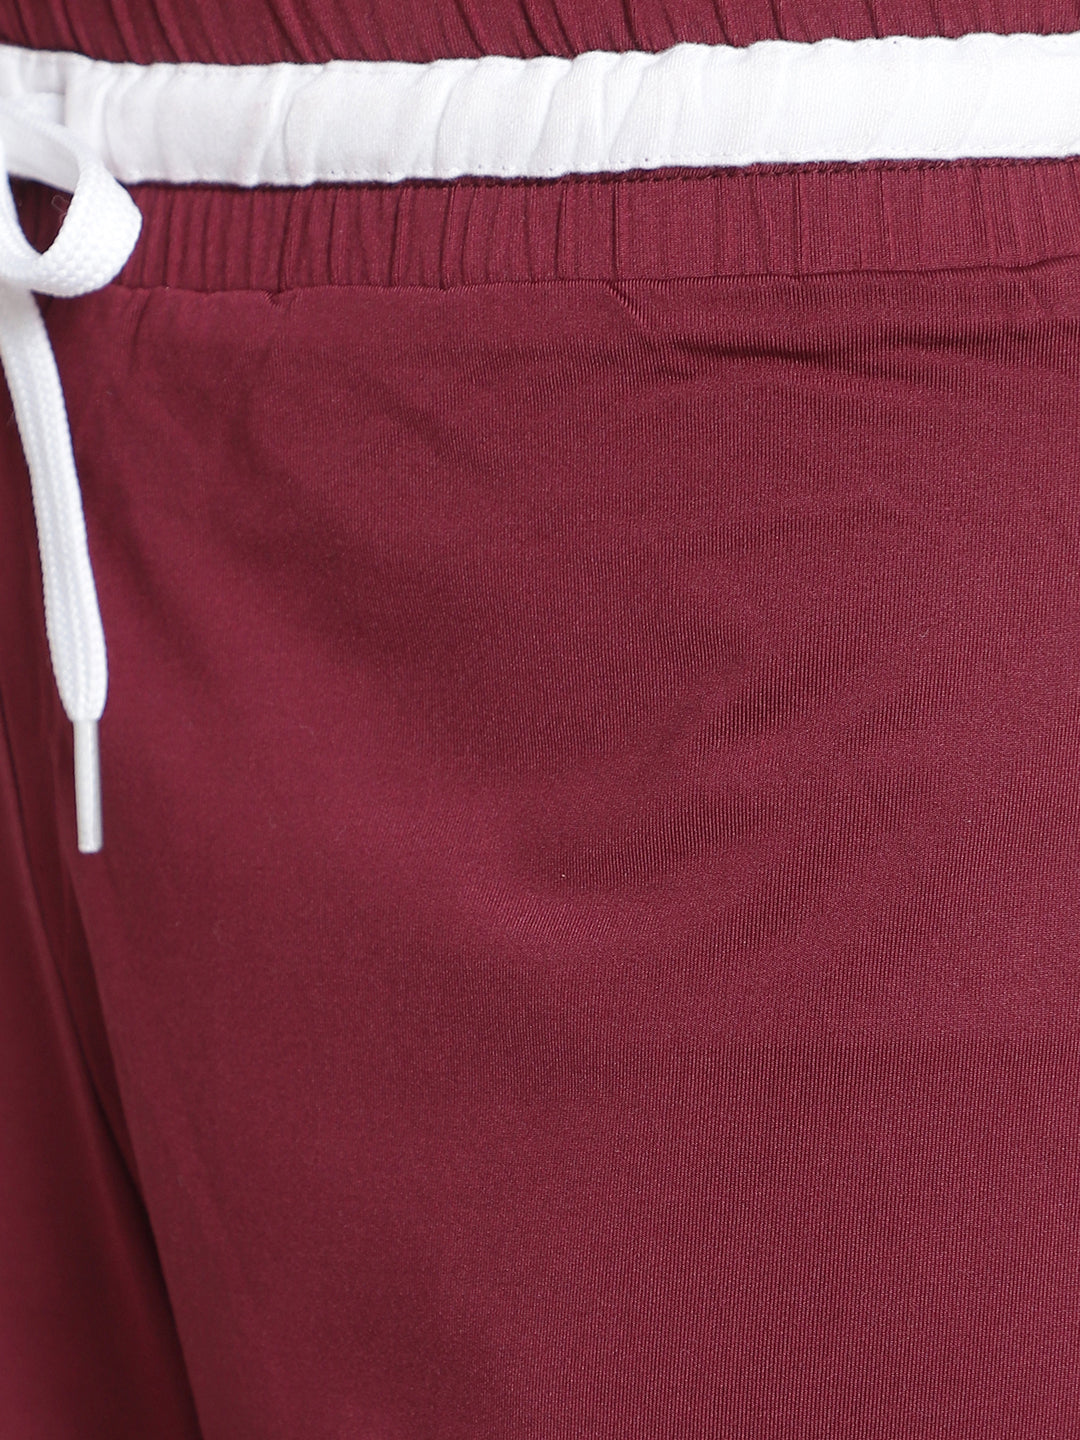 Axis Tank Top & Track Pant - Maroon